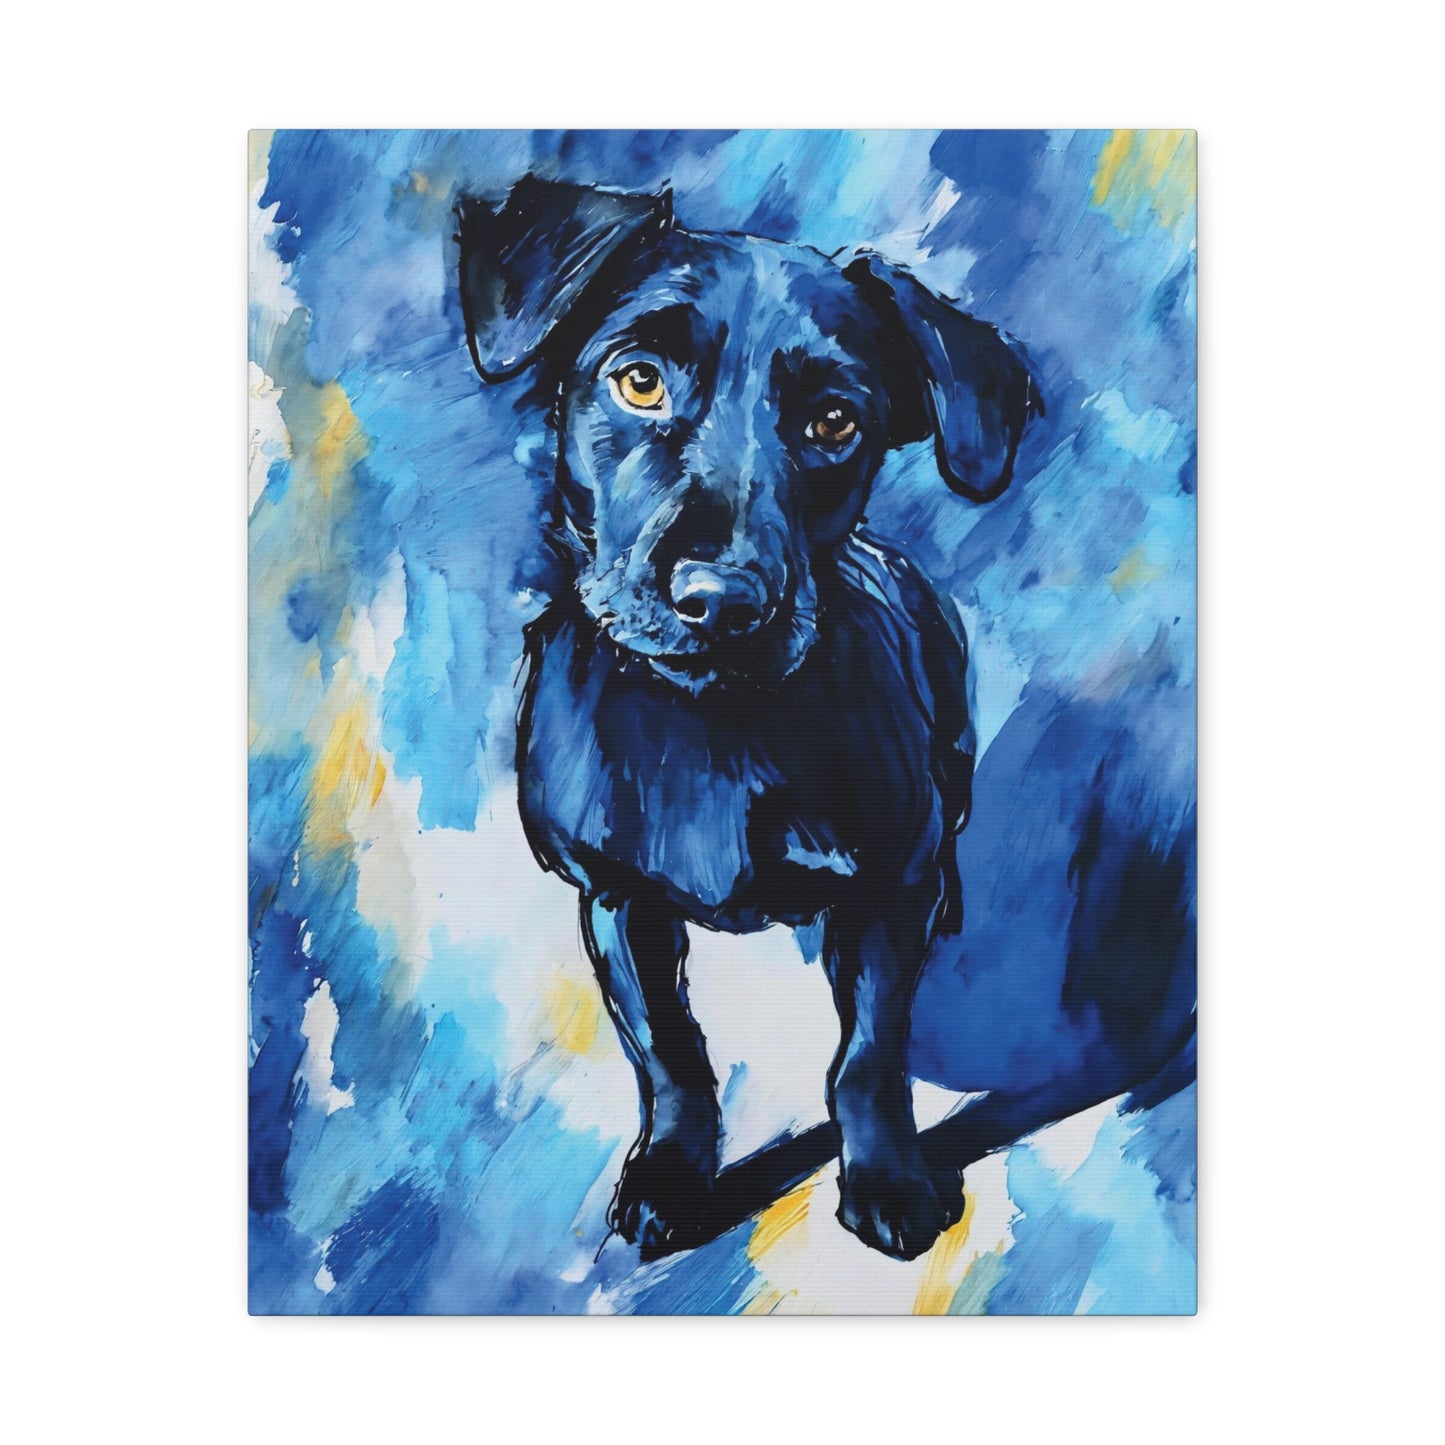 “Ode to Canine Contemplation in Shades of Blue”